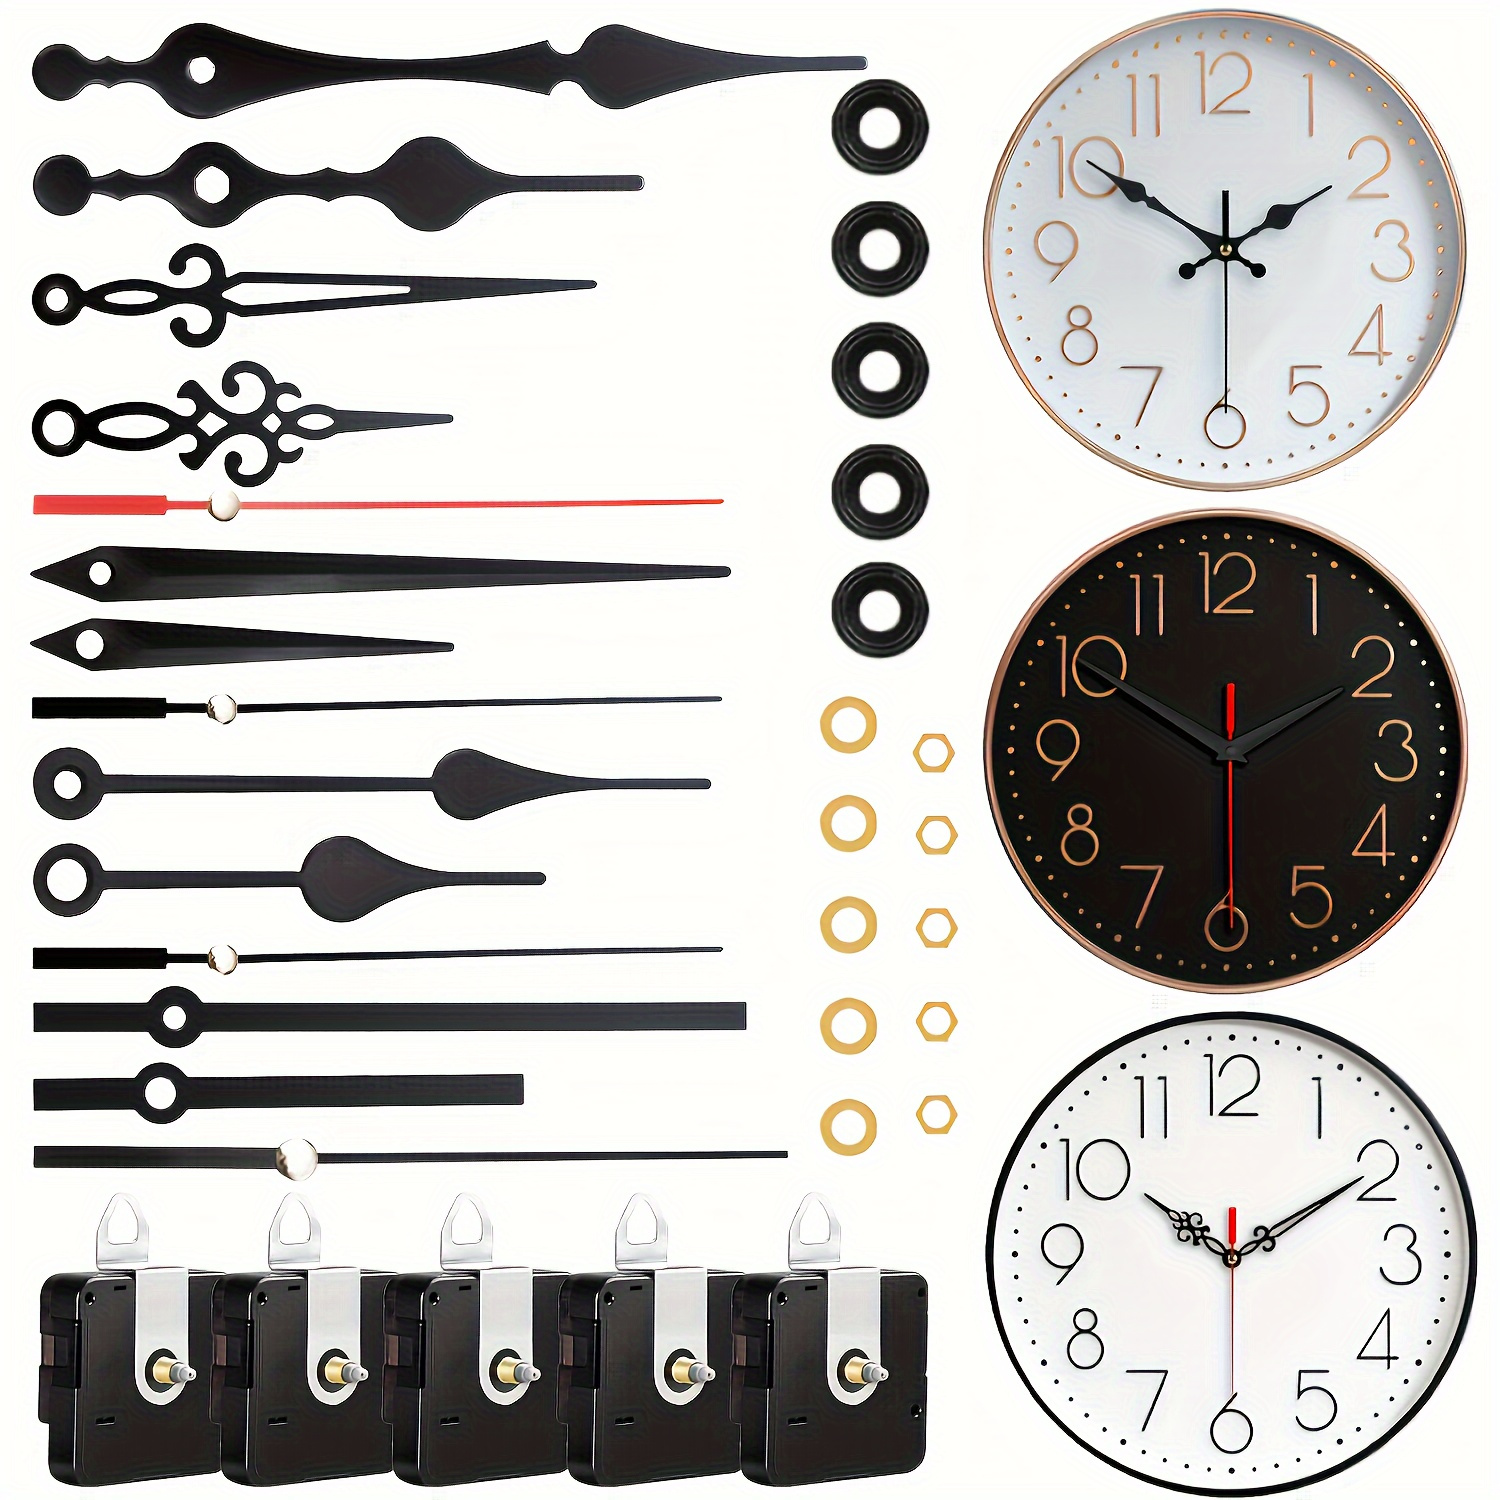 

5 Sets Clock Movement Components, Quartz High Torque Long Axis Clock Movement Replacement With 5 Pairs Of Hands, Clock Repair Parts Replacement Clock Movement Kits (batteries Not Included)